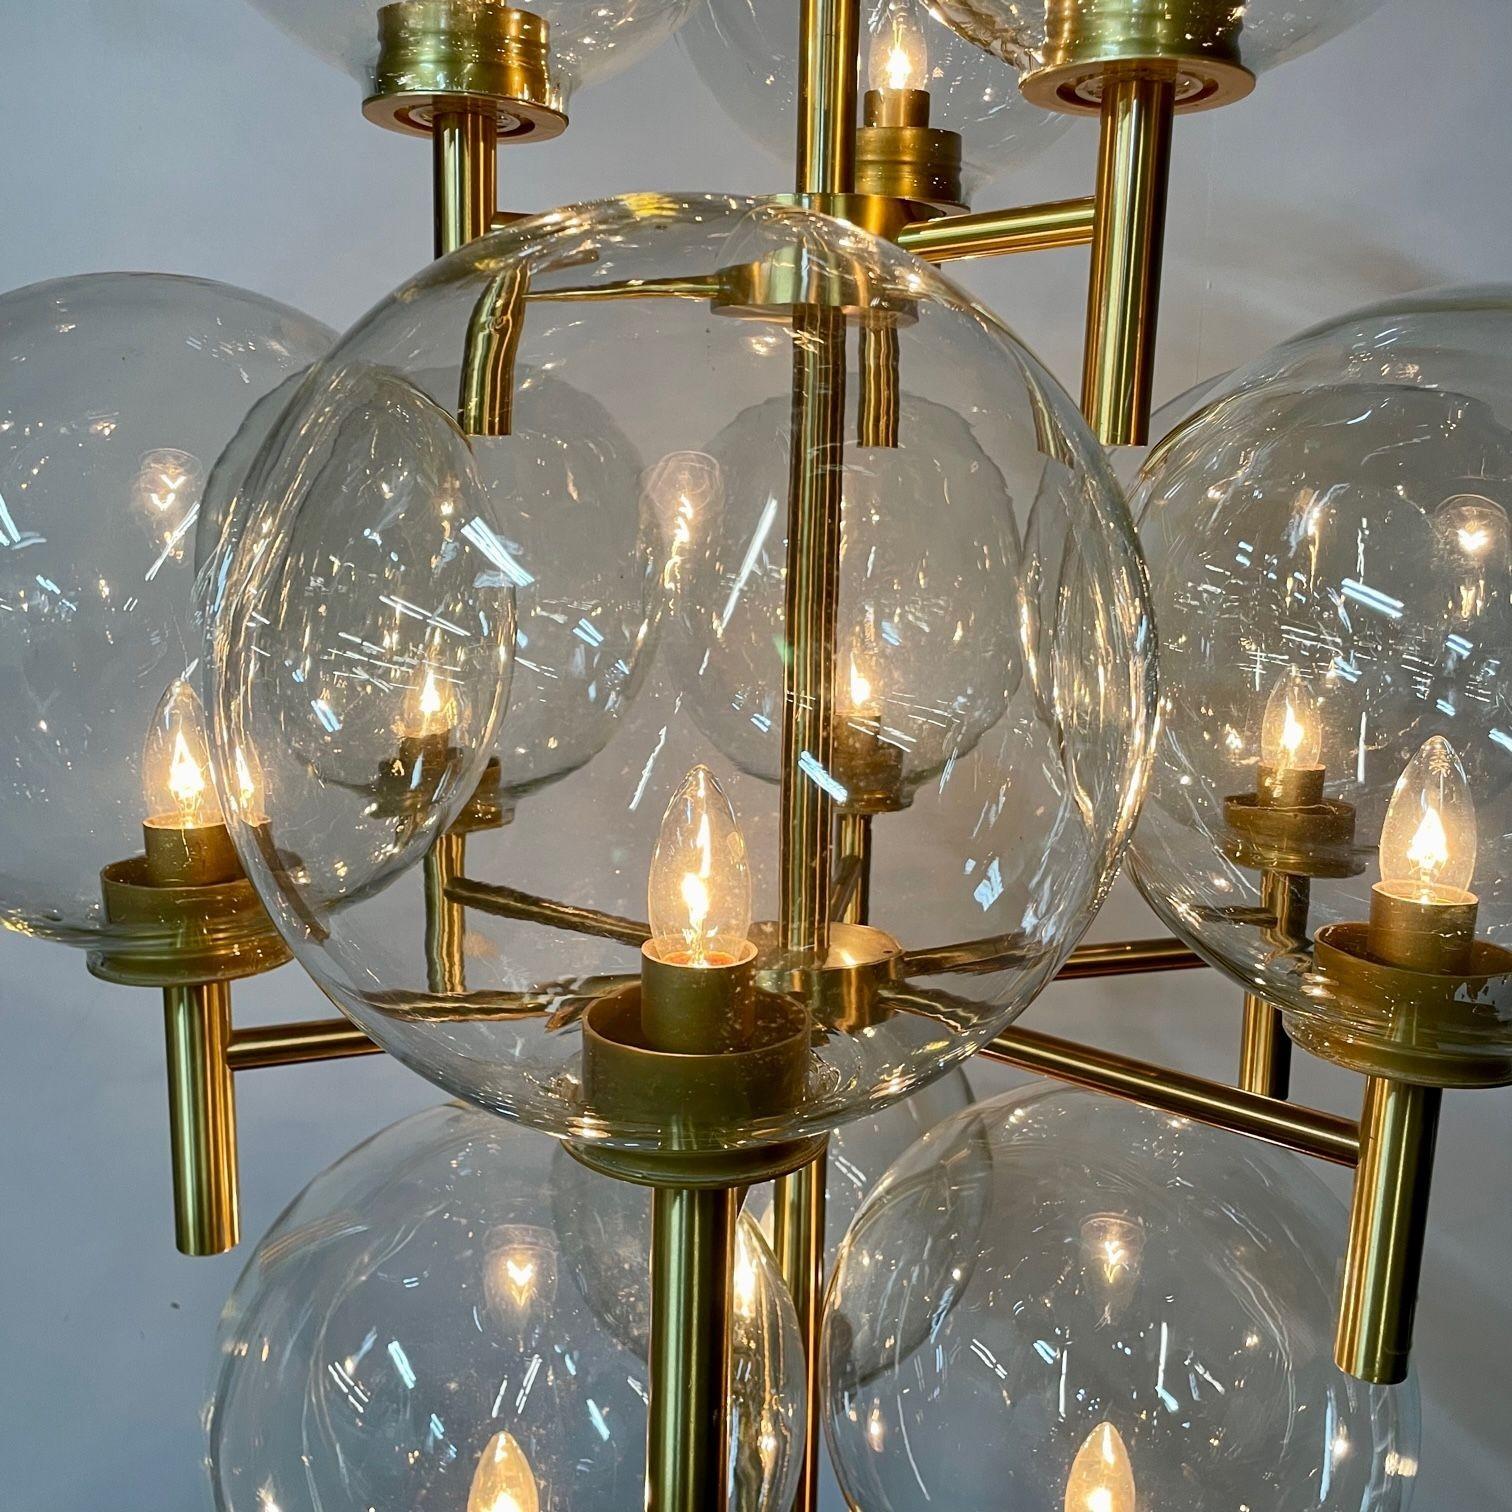 Pair of Monumental Mid-Century Modern Style Chandeliers in Amber Glass and Brass For Sale 5